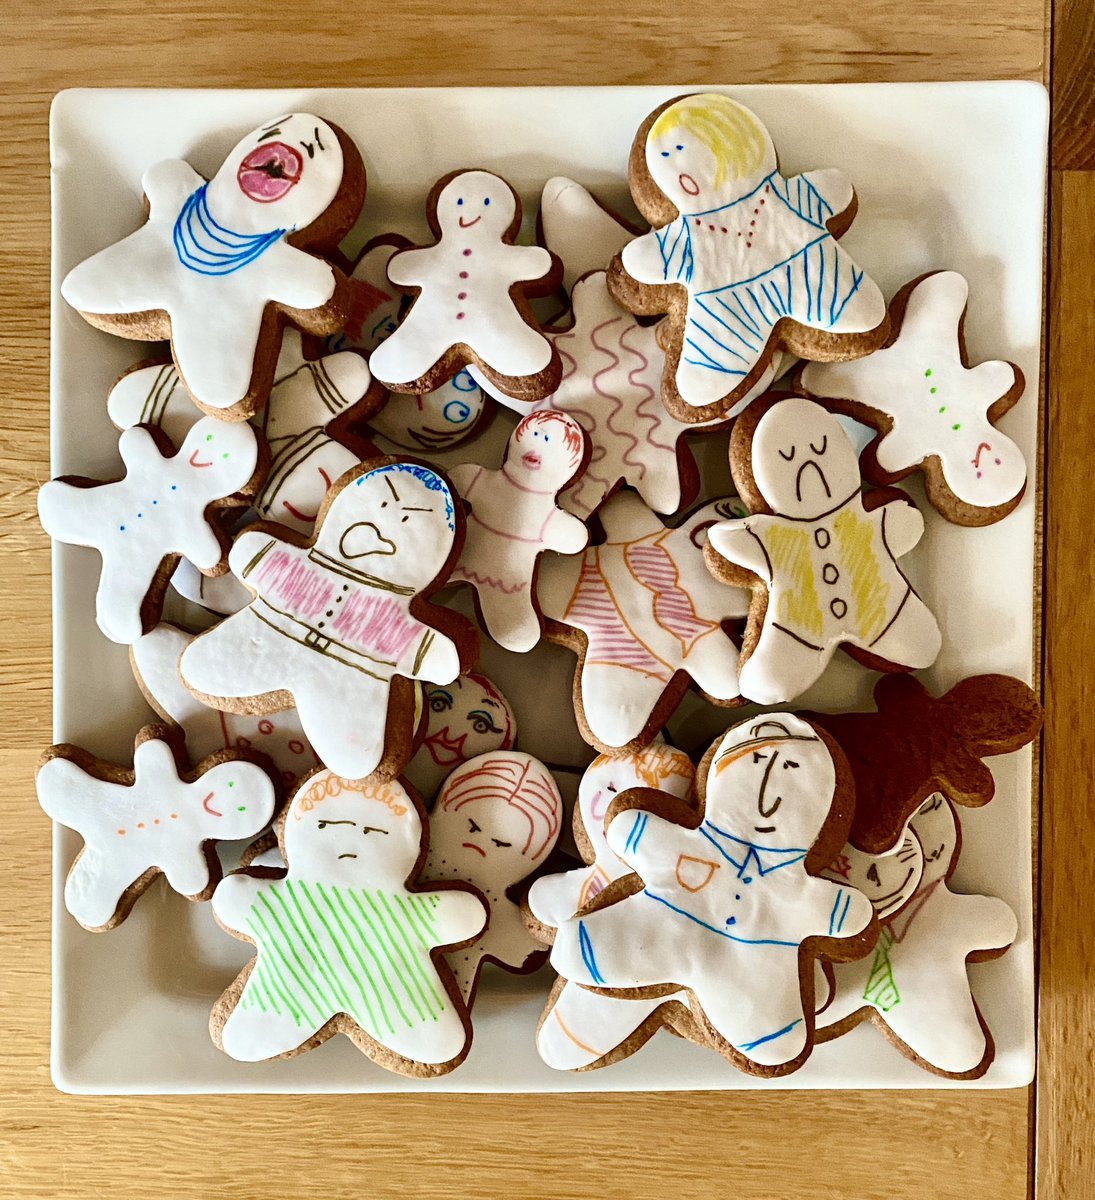 Easter for us is always an extended family affair. Siblings and the kids and their kids. I make the gingerbread men. I like to make them antsy. I figure being put in the oven and having to leg it out would give anyone the arsehole. A teaching opportunity, if anything.